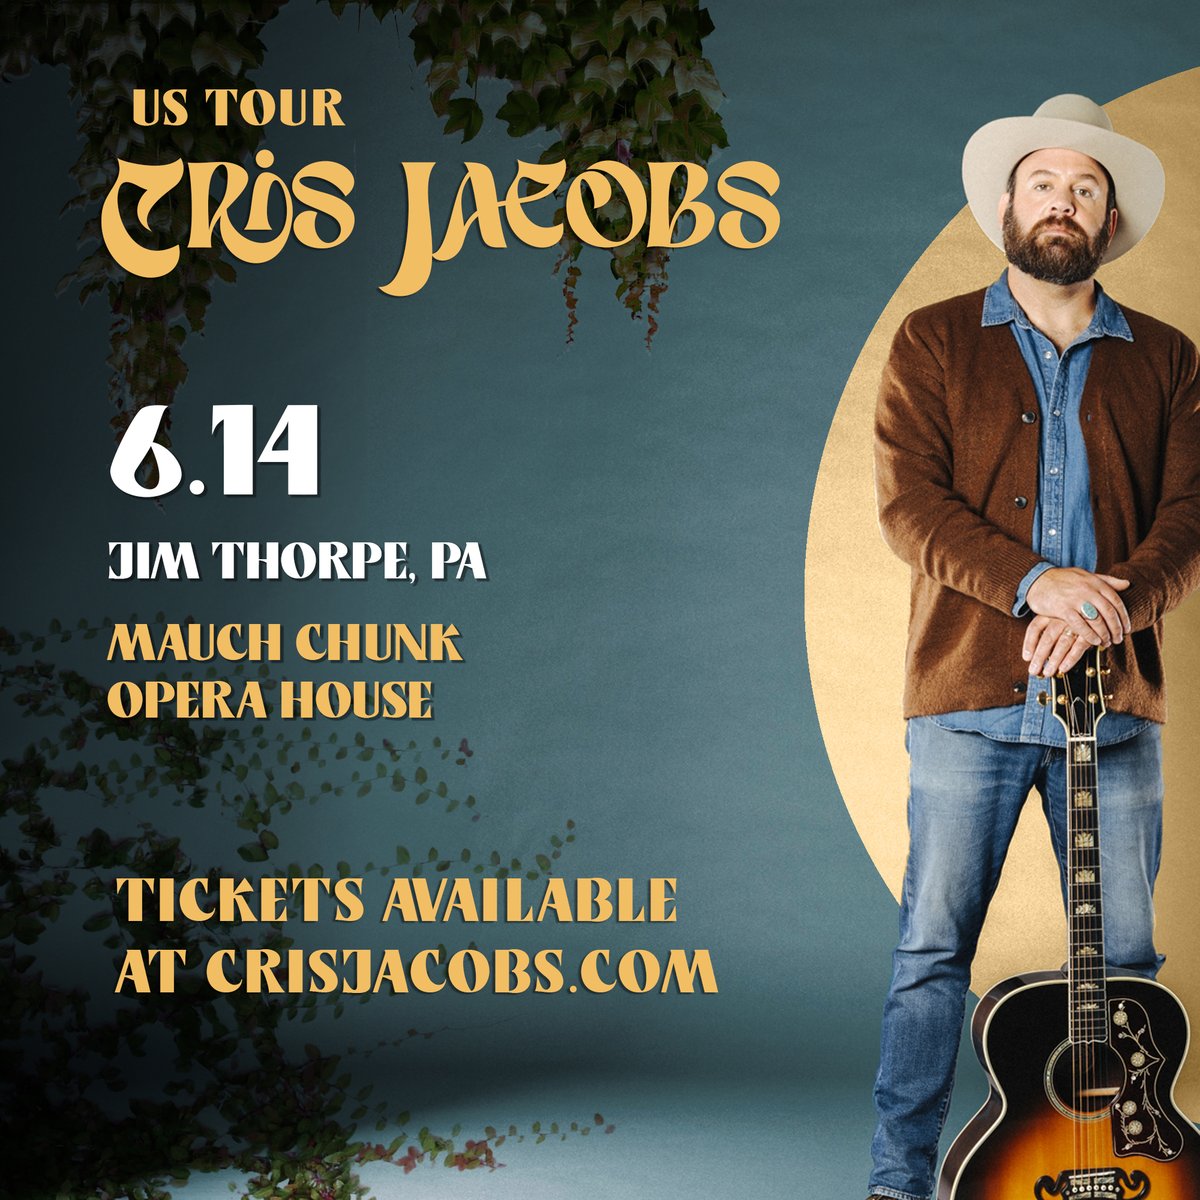 New show added: I'll be at The Mauch Chunk Opera House in Jim Thorpe, PA on June 14th!! Tickets are on sale NOW! mauchchunkoperahouse.thundertix.com/events/226678